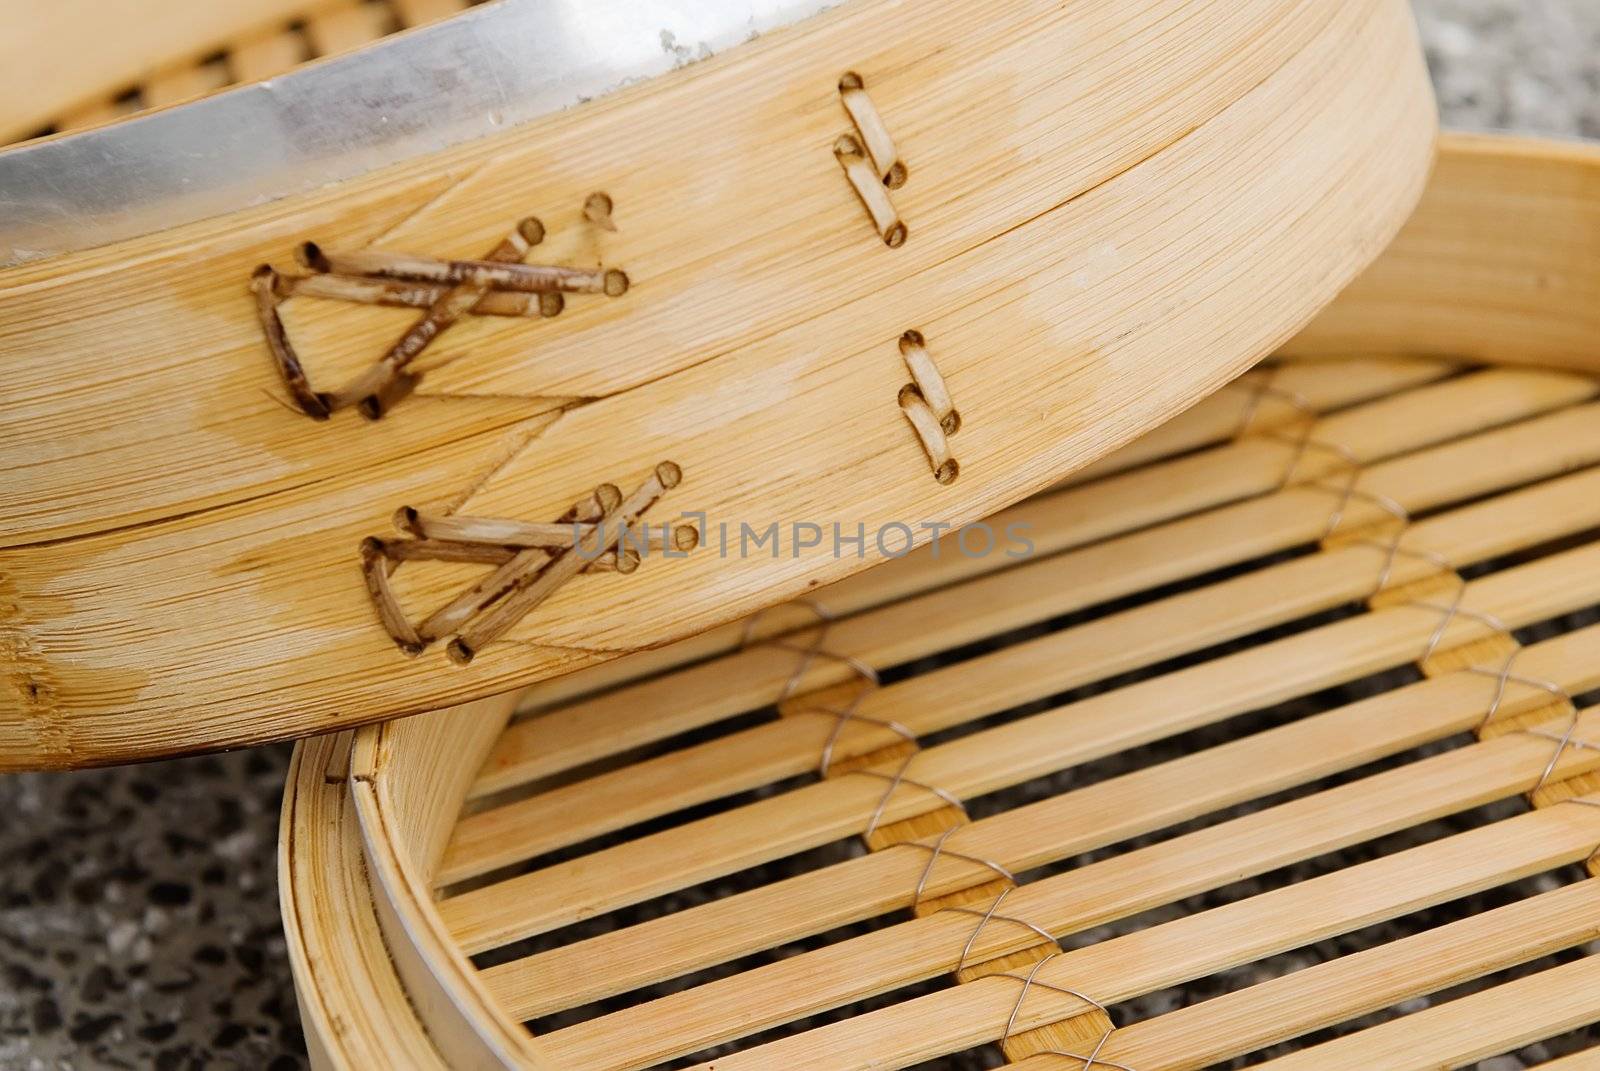 It is a chinese steamer made with bamboo. by elwynn